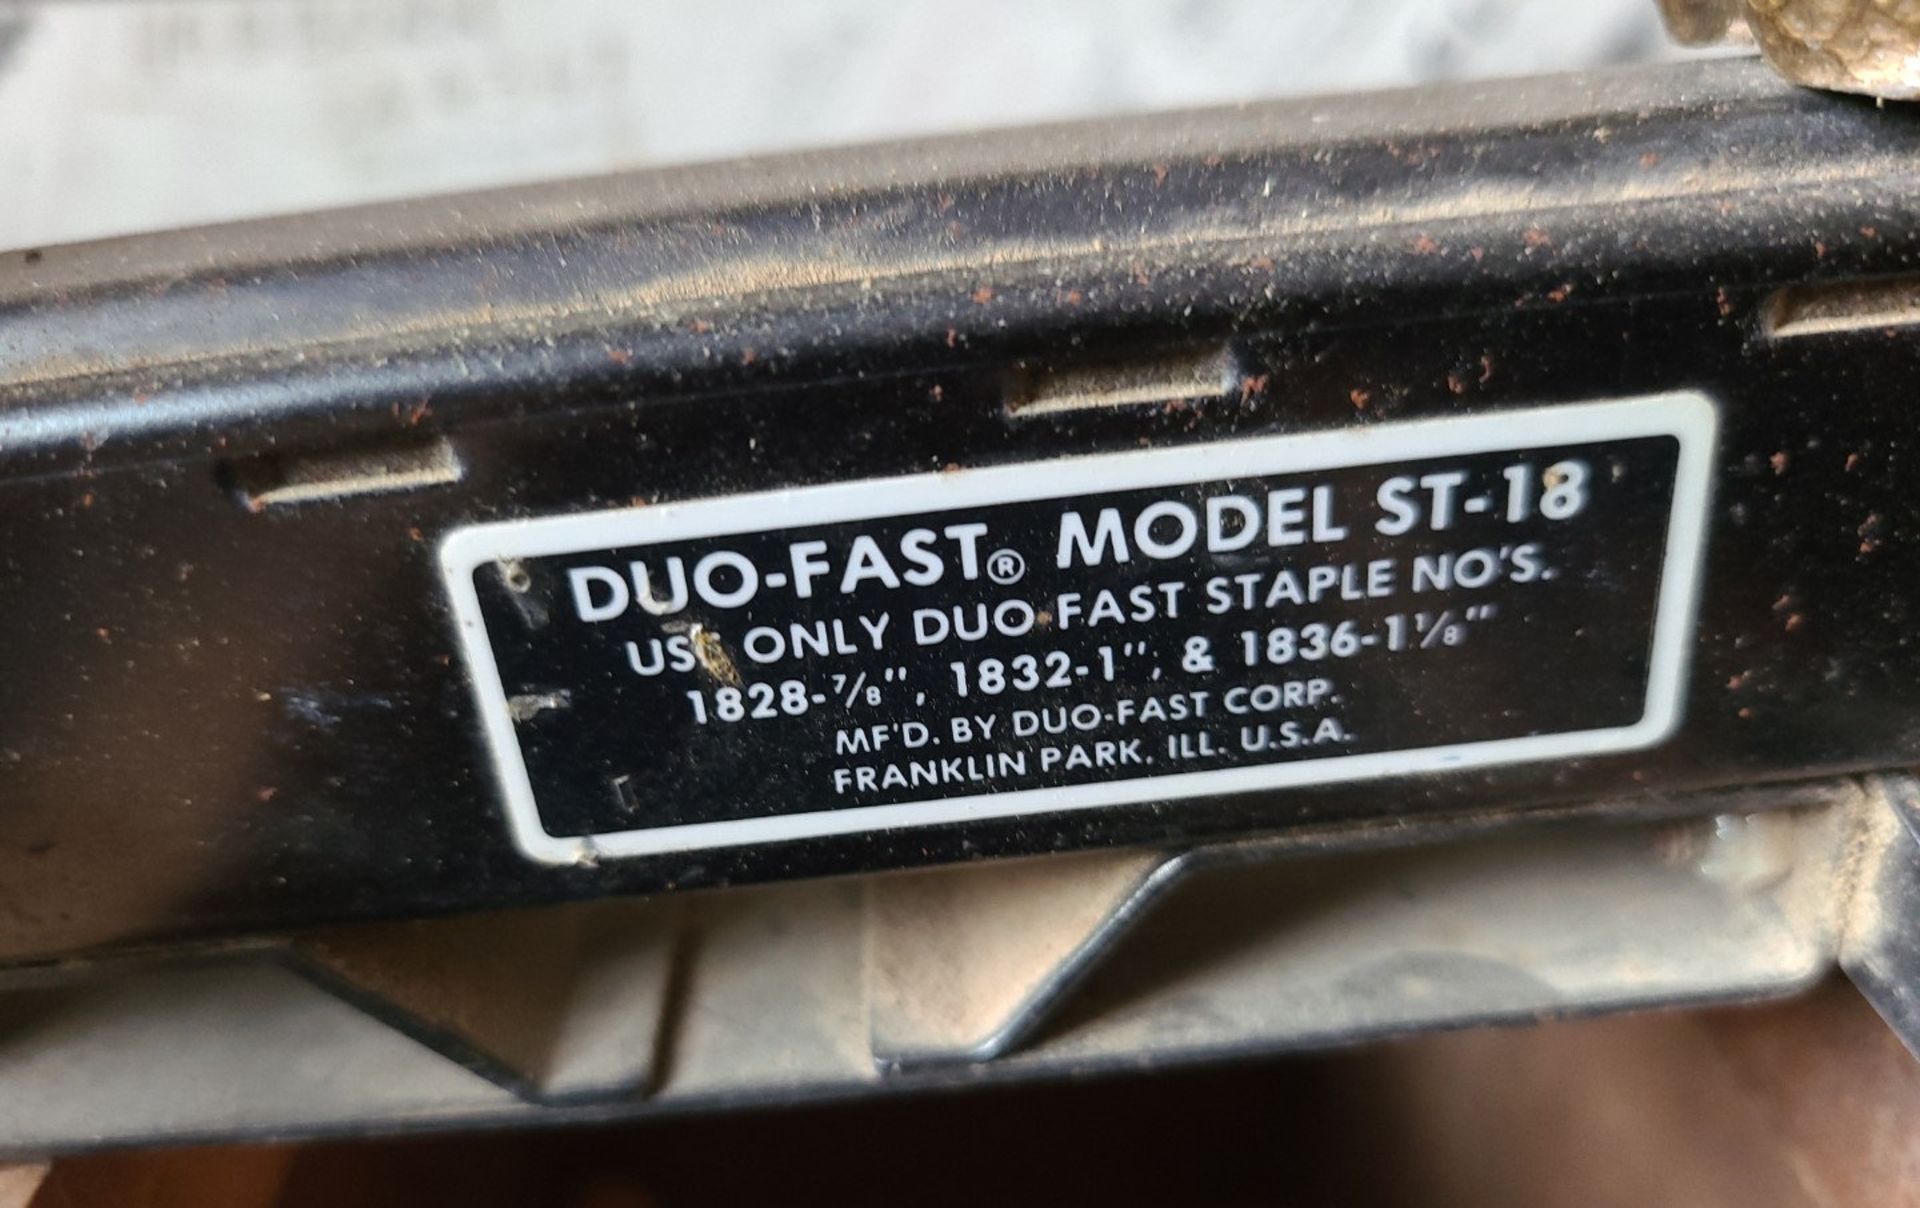 1 x Duo-Fast Model St-18 Floor Stapler - Ref: CNT193 - CL846 - Location: Oxford OX2This lot is - Image 2 of 4